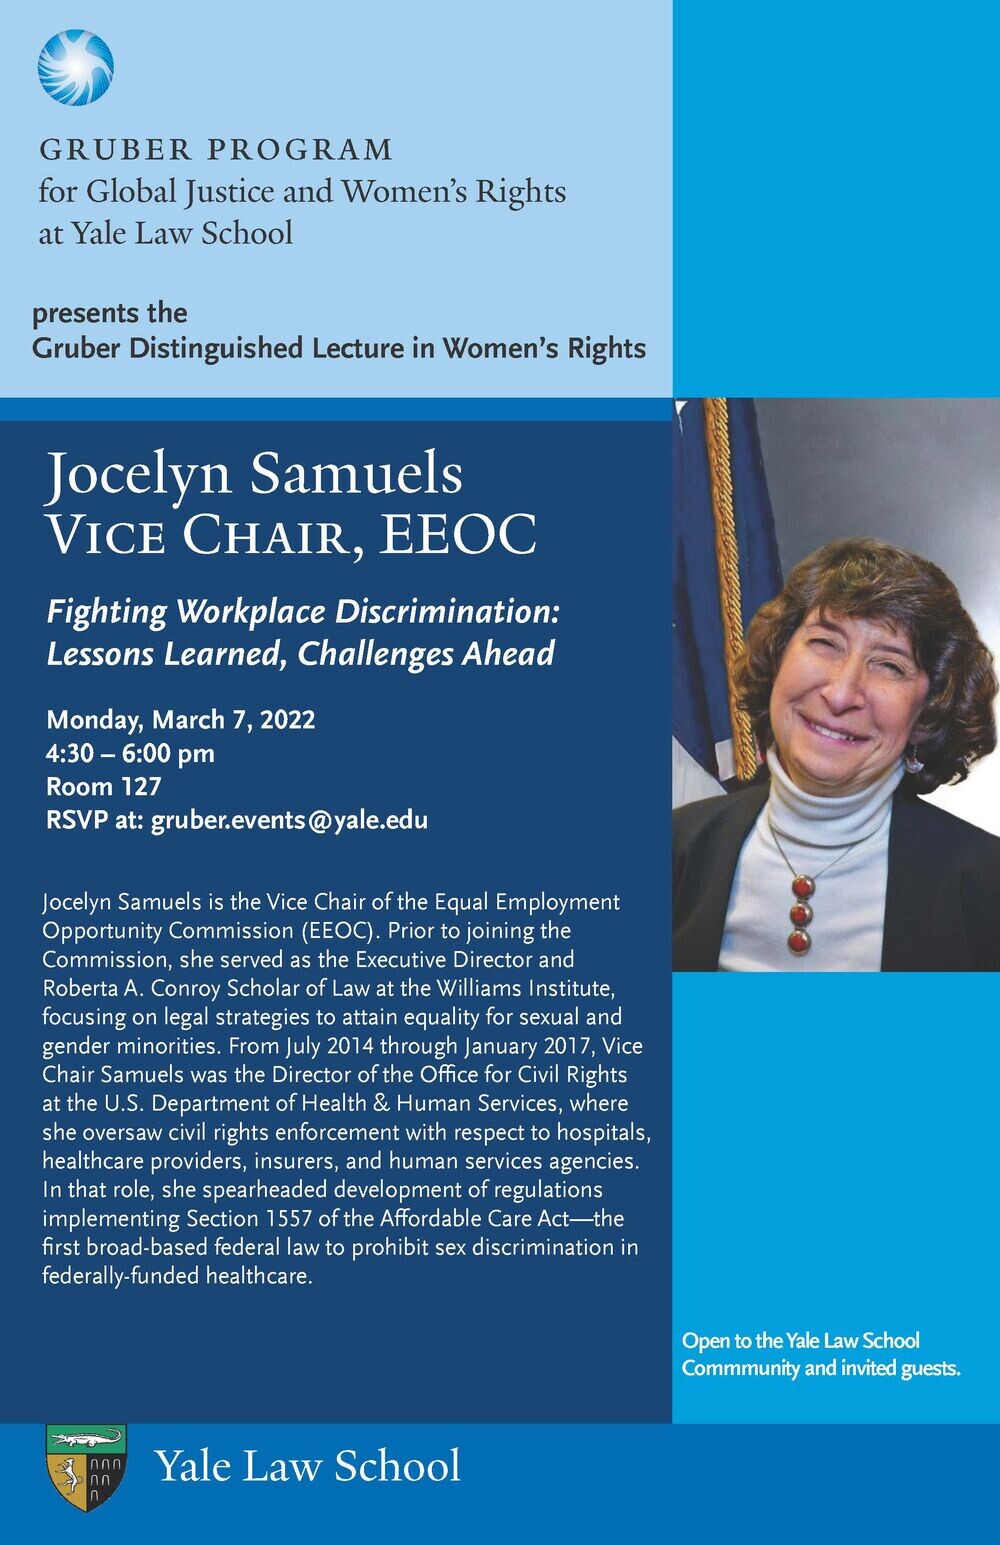 A poster for the Gruber Program lecture by Jocelyn Samuels titled, "Fighting Workplace Discrimination."